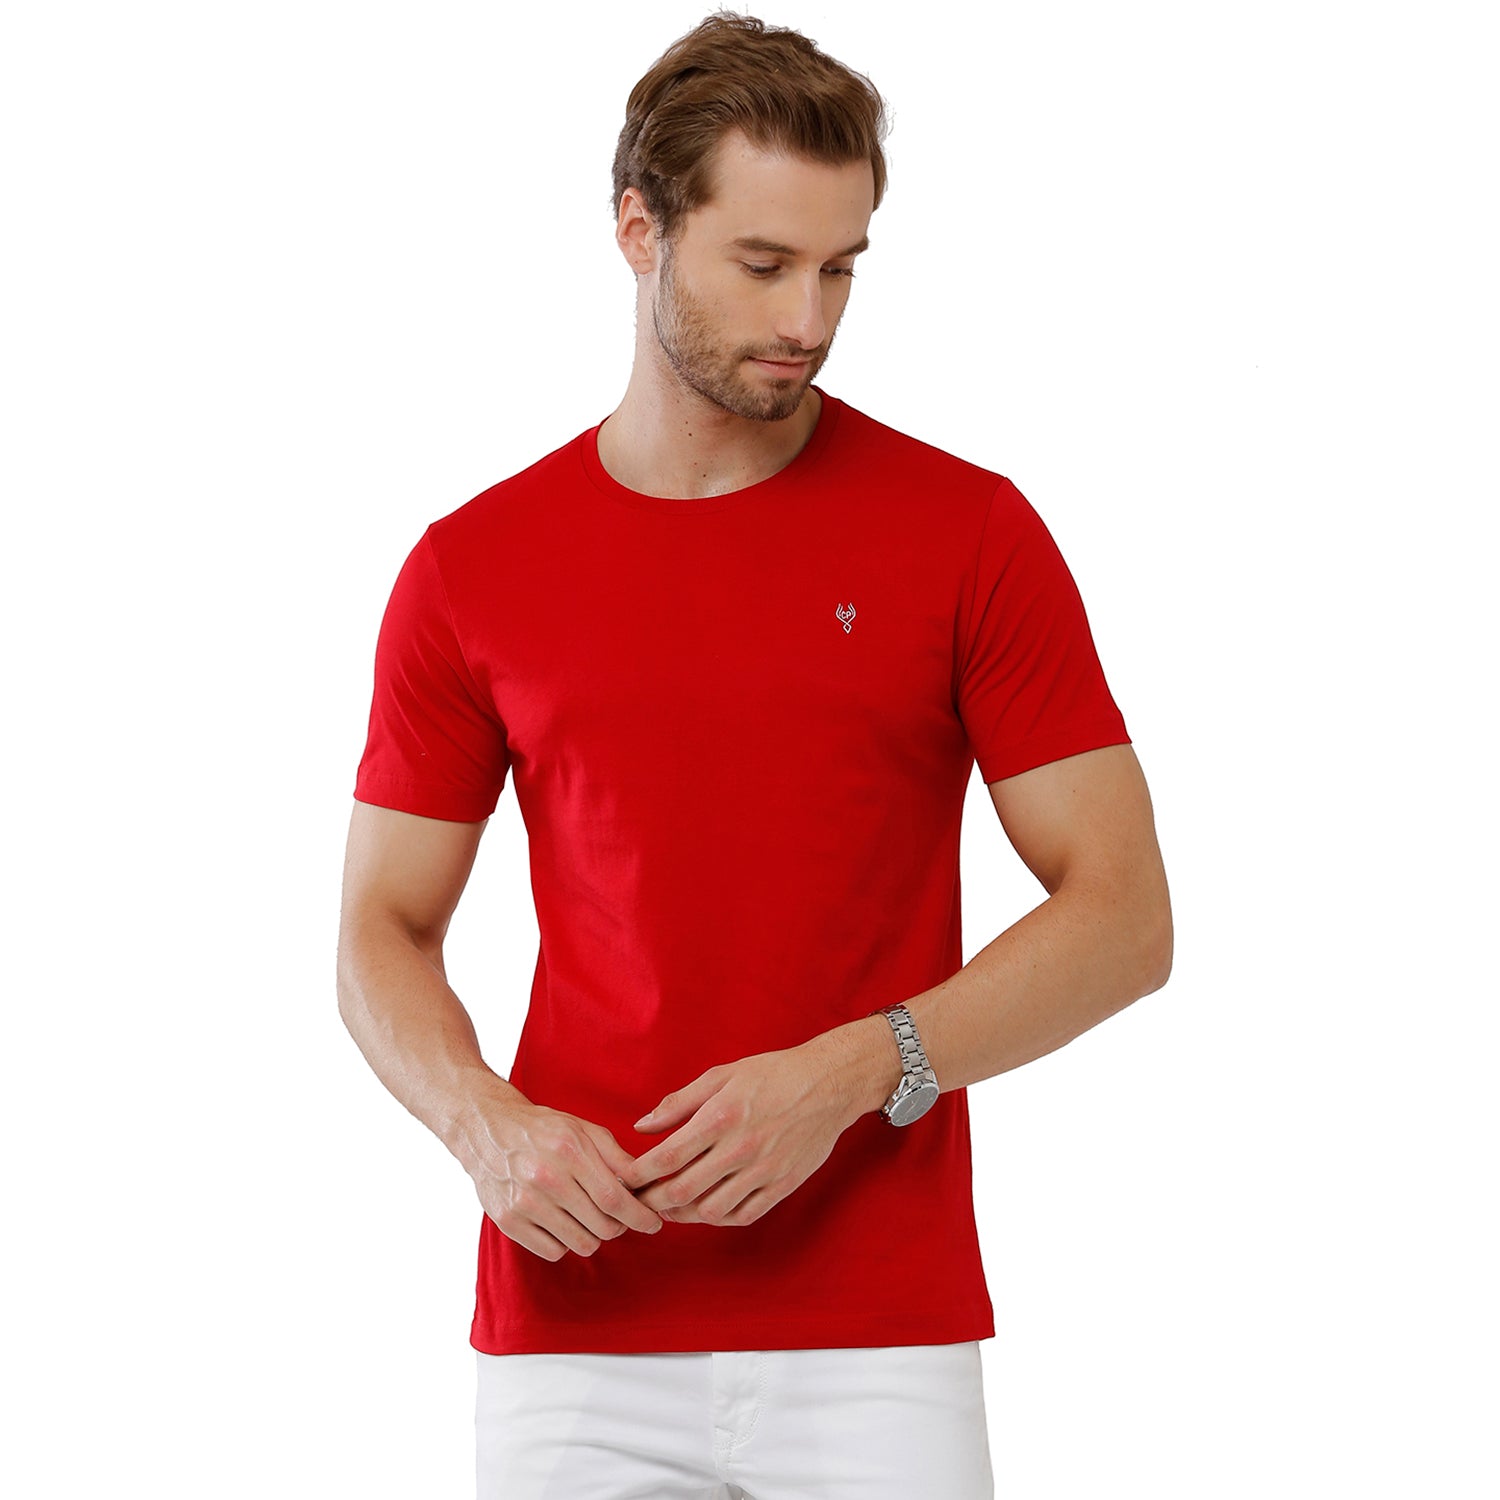 Classic Polo Men's Solid Single Jersey Red Half Sleeve Slim Fit T-Shirt - Kore-04 T-shirt Classic Polo 